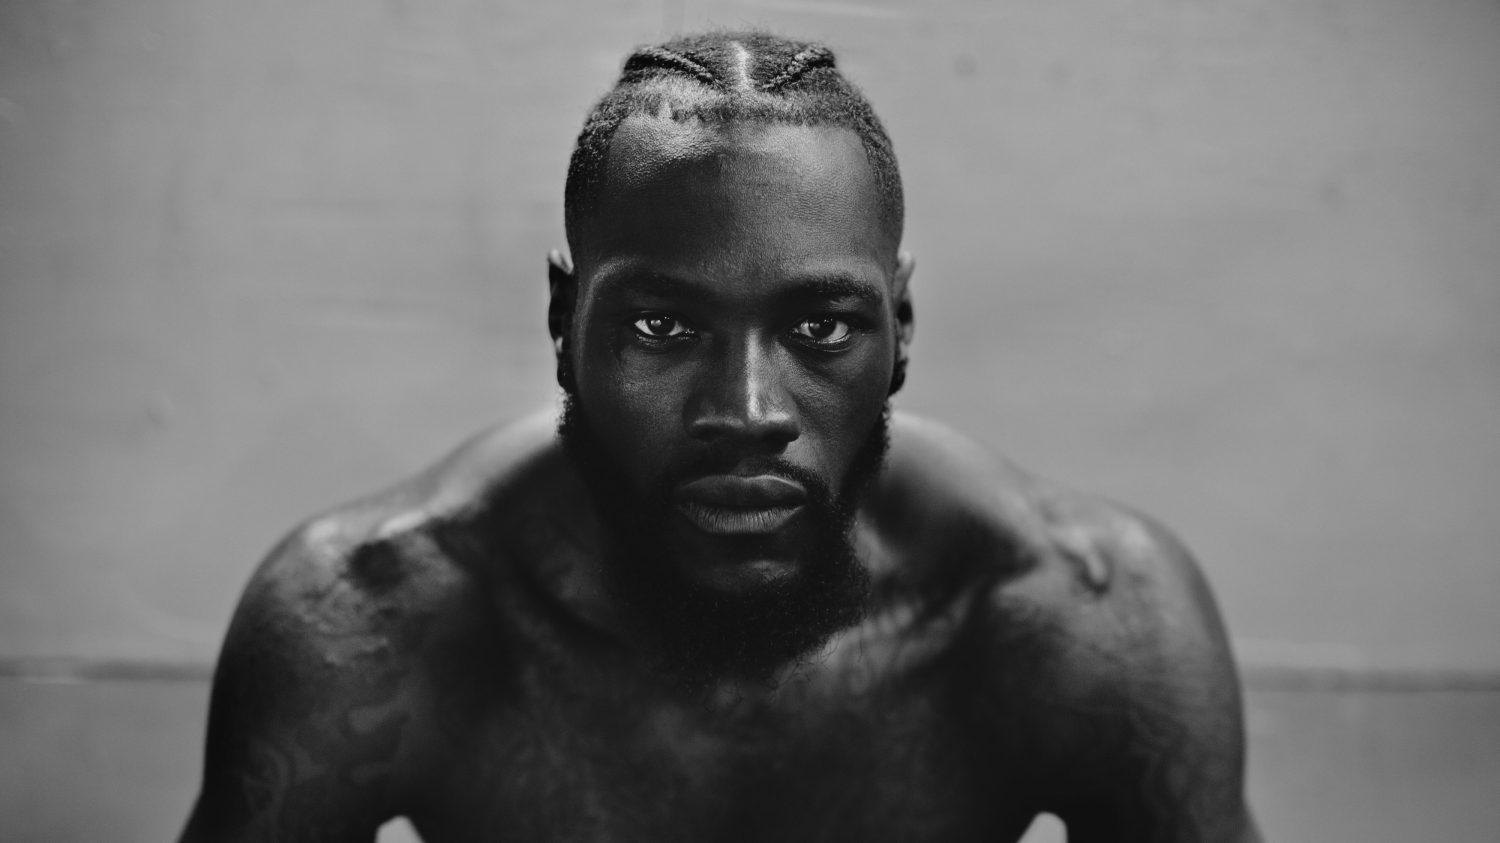 Deontay Wilder Might Restore Glory Days of America In Heavyweight Boxing